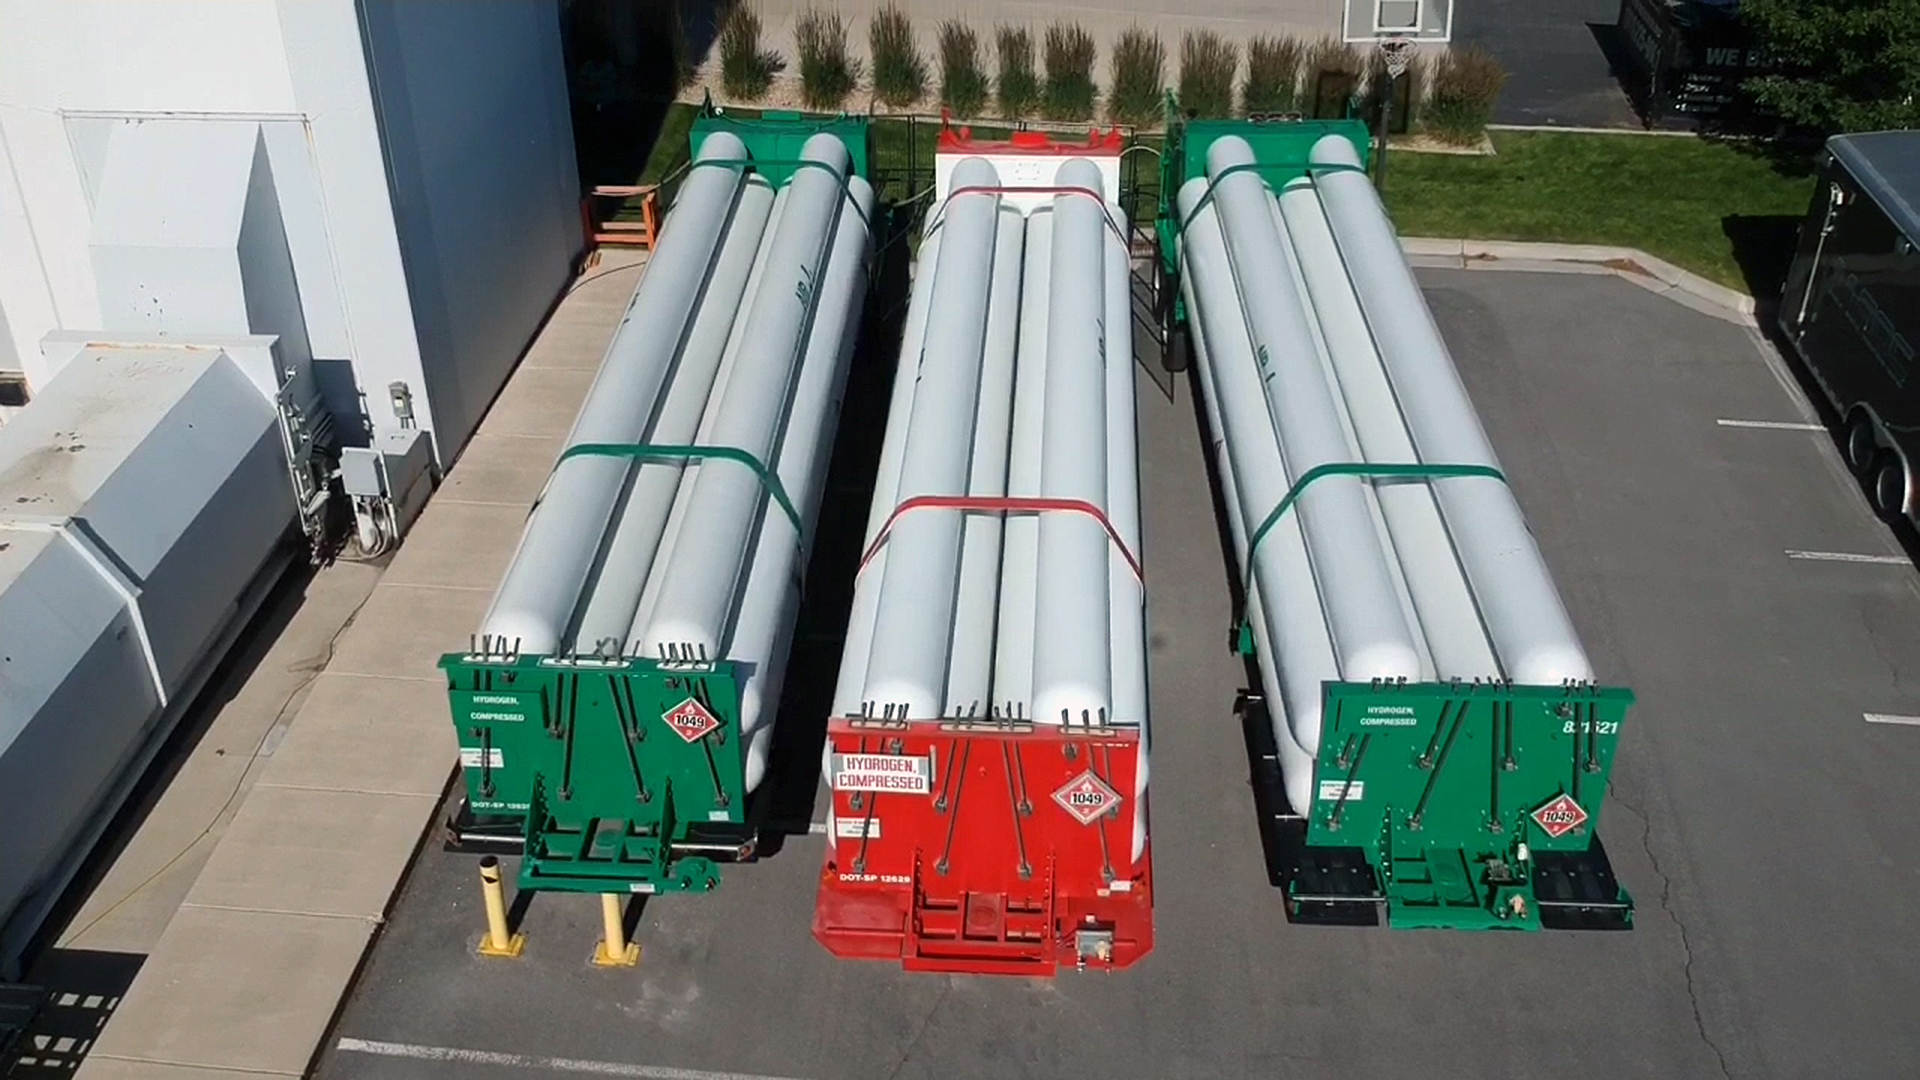 Trailers filled with hydrogen parked outside a lab near Salt Lake City, Utah